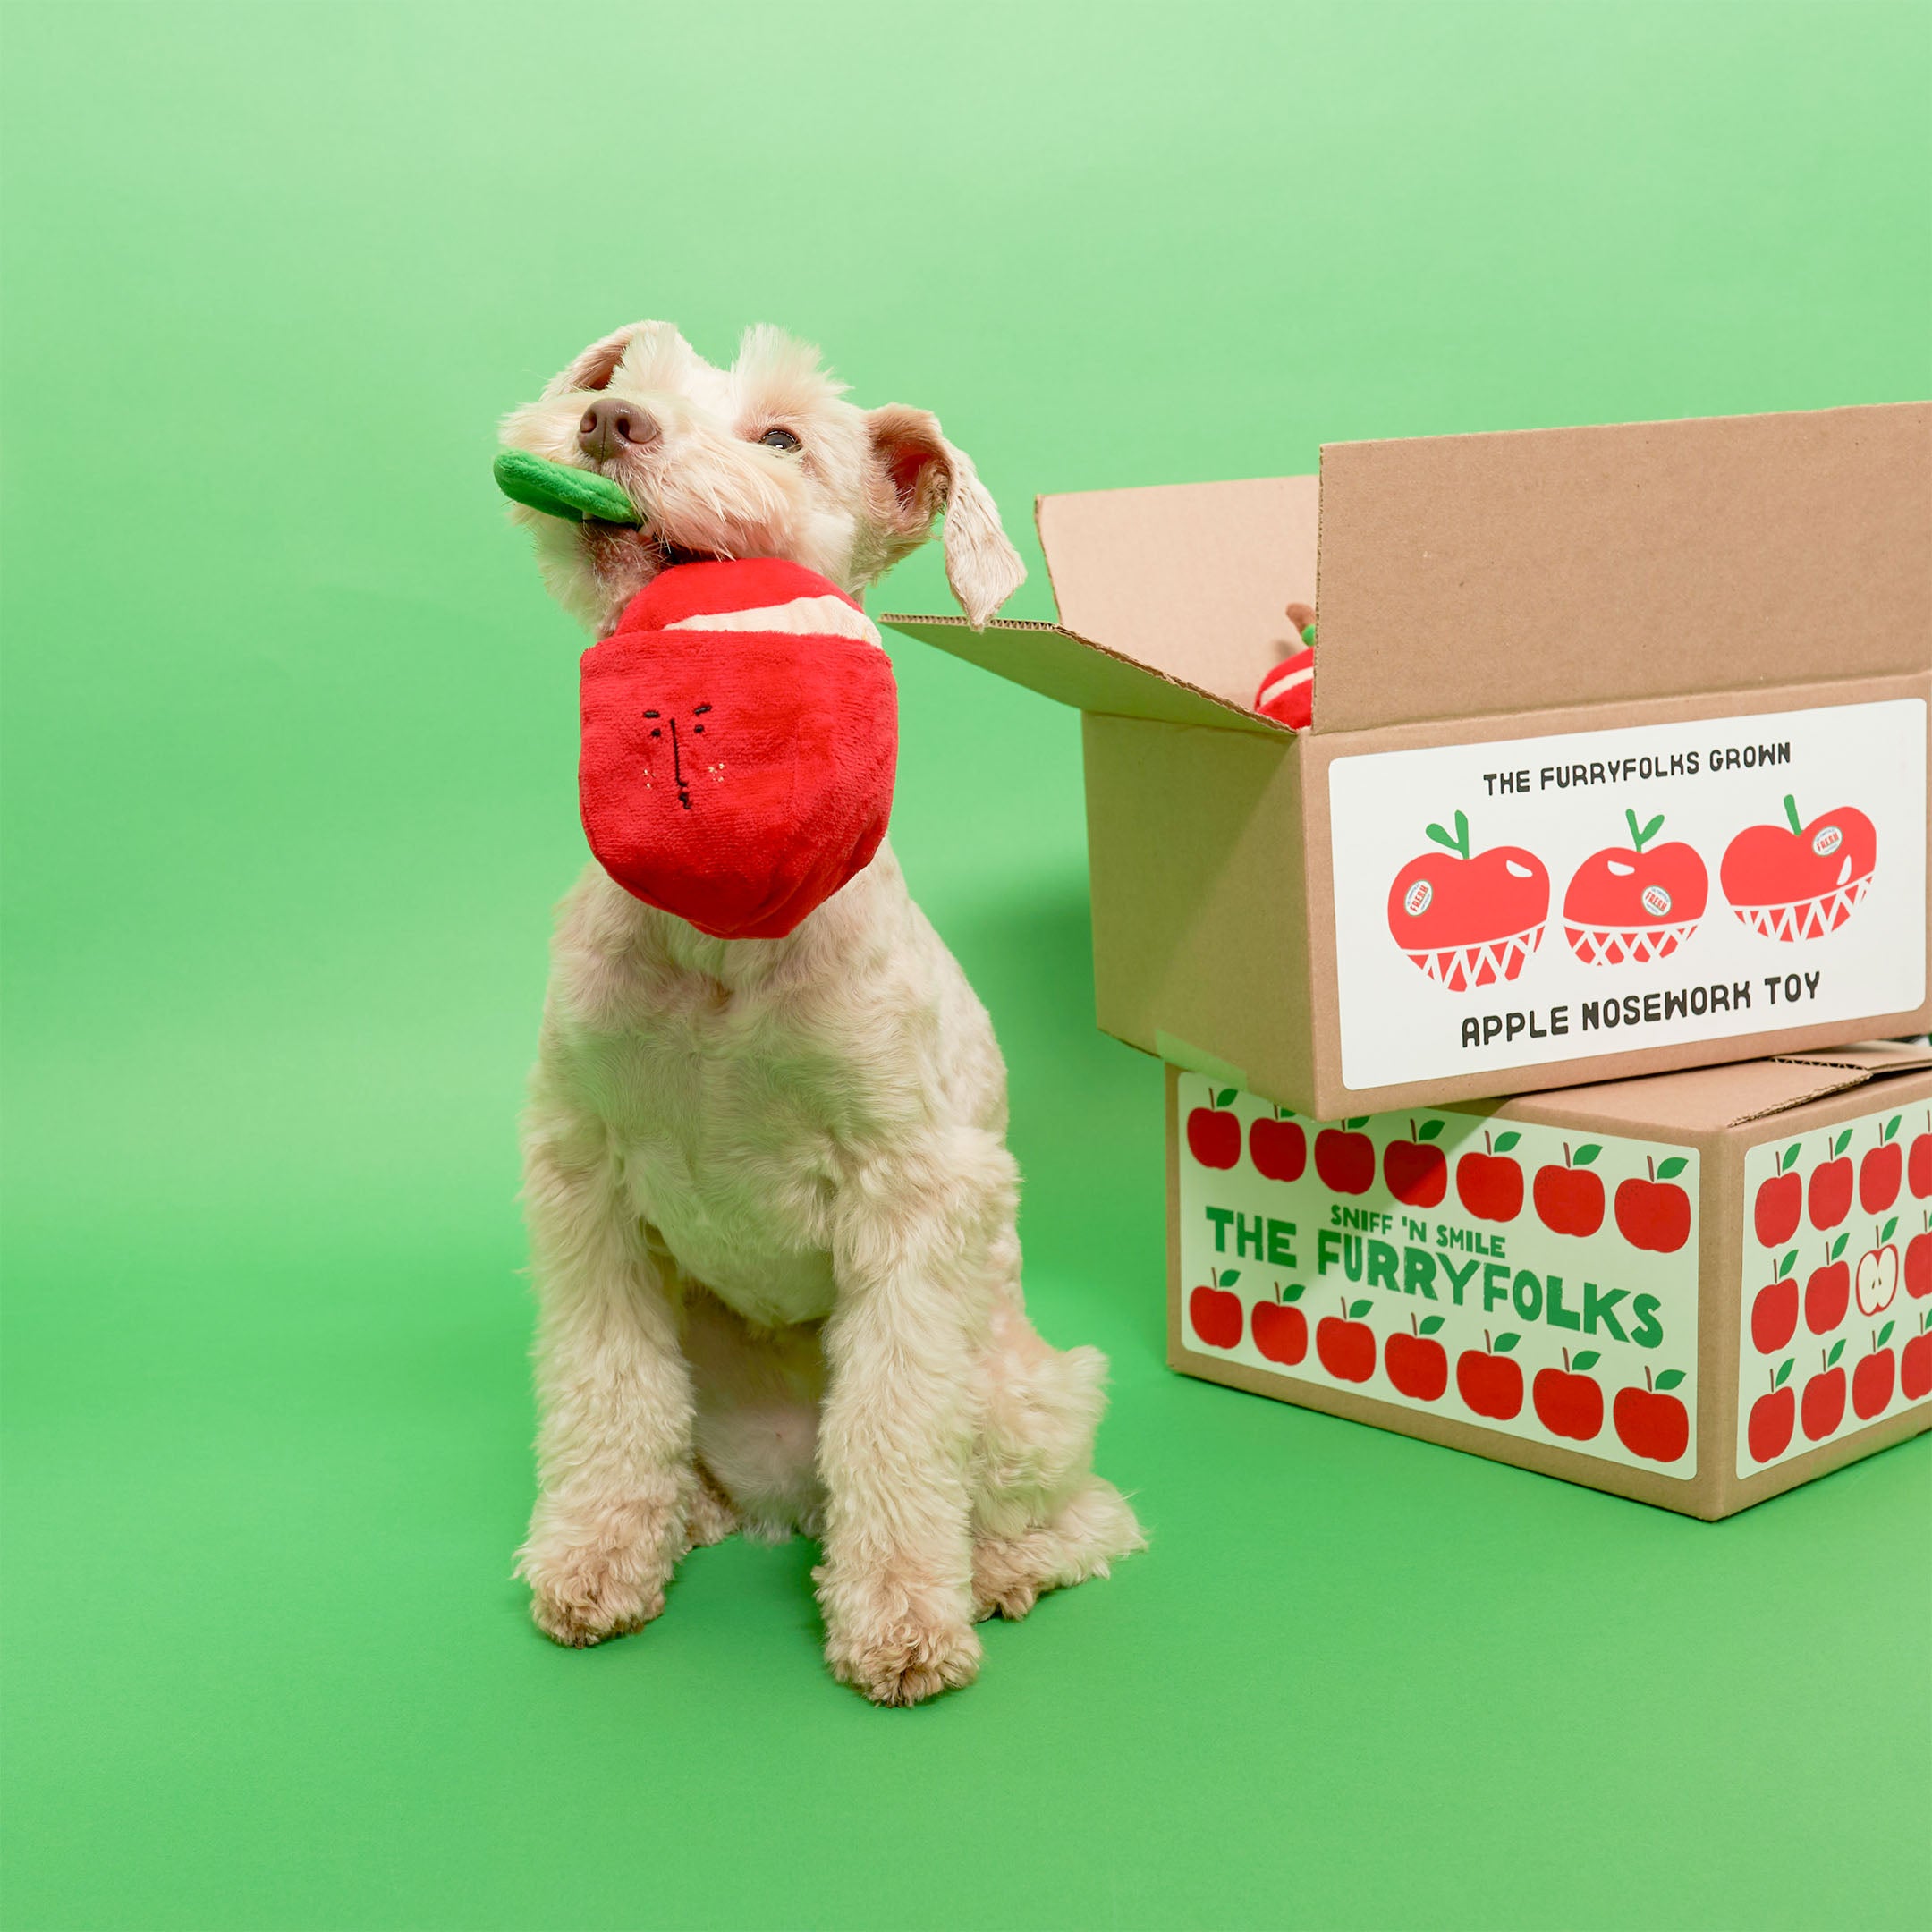 APPLE NOSEWORK TOY